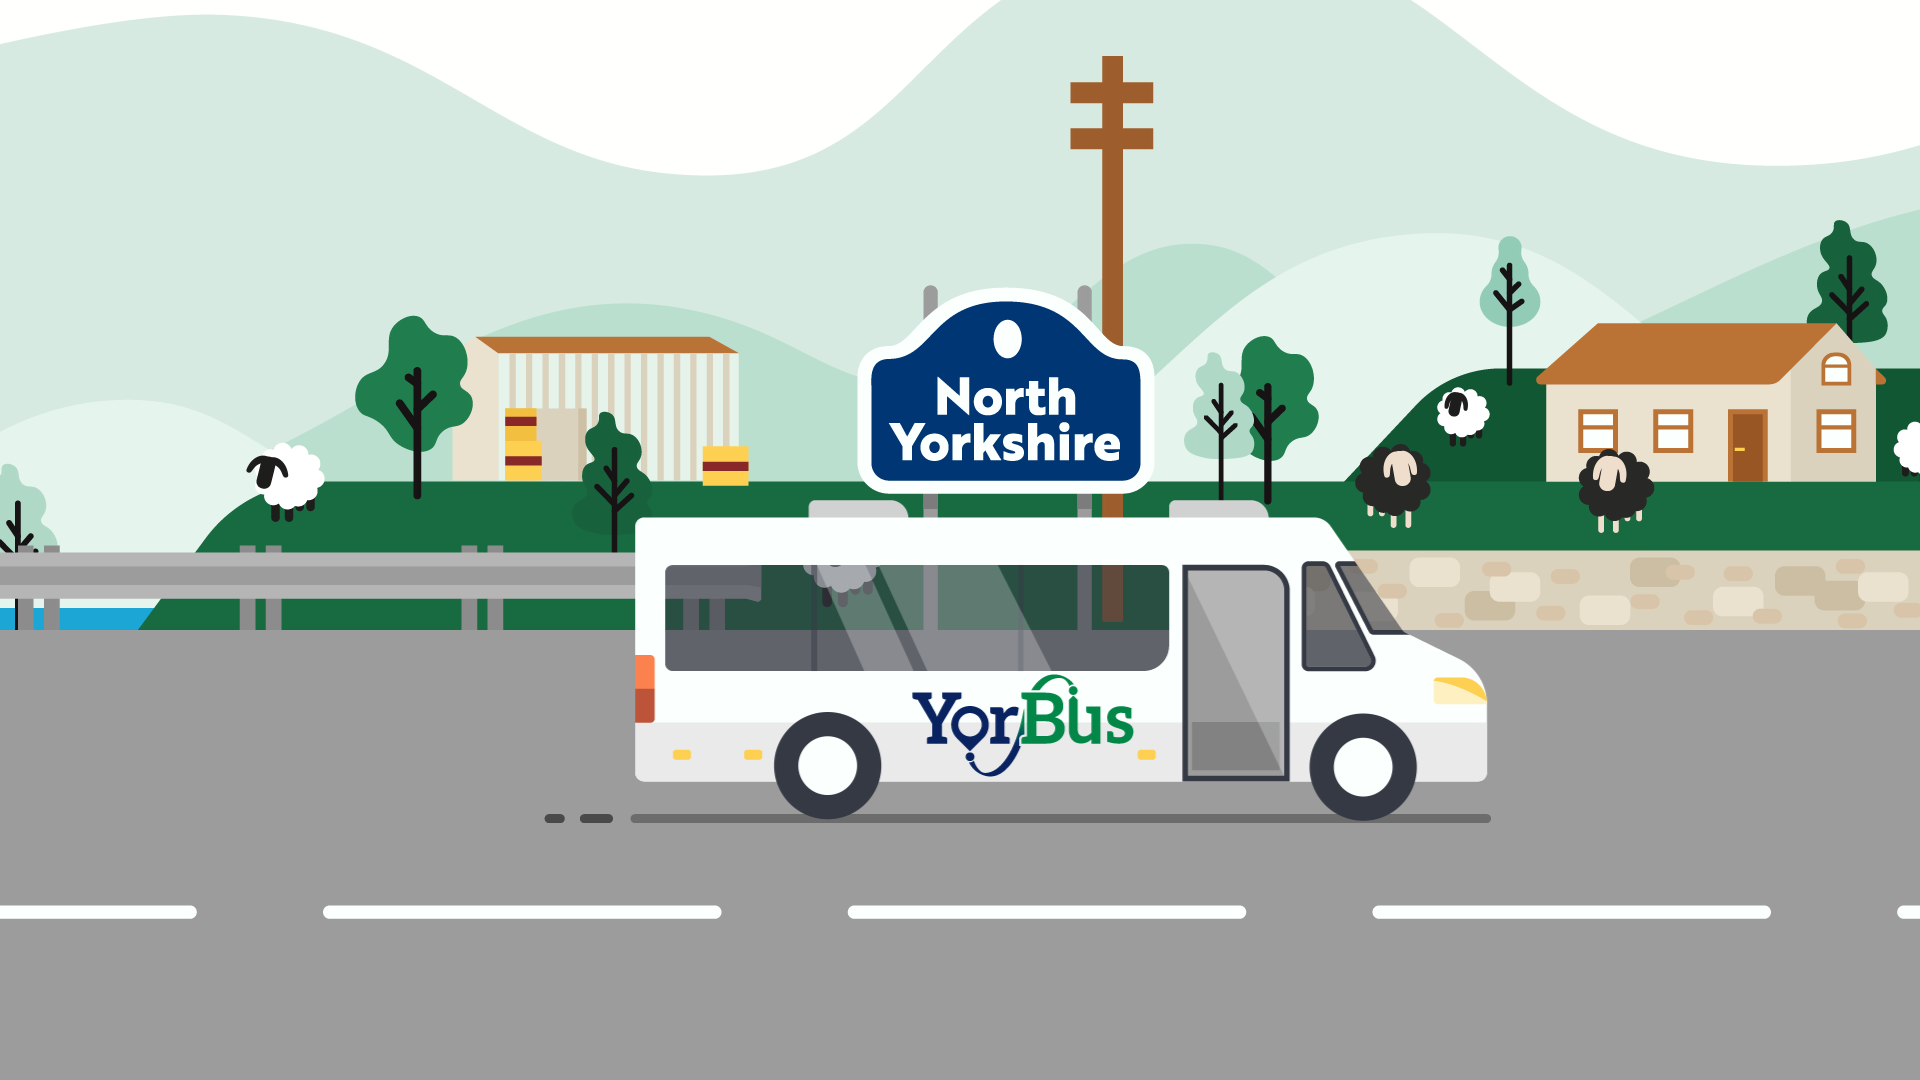 An image from the animation showing a YorBus bus driving in North Yorkshire